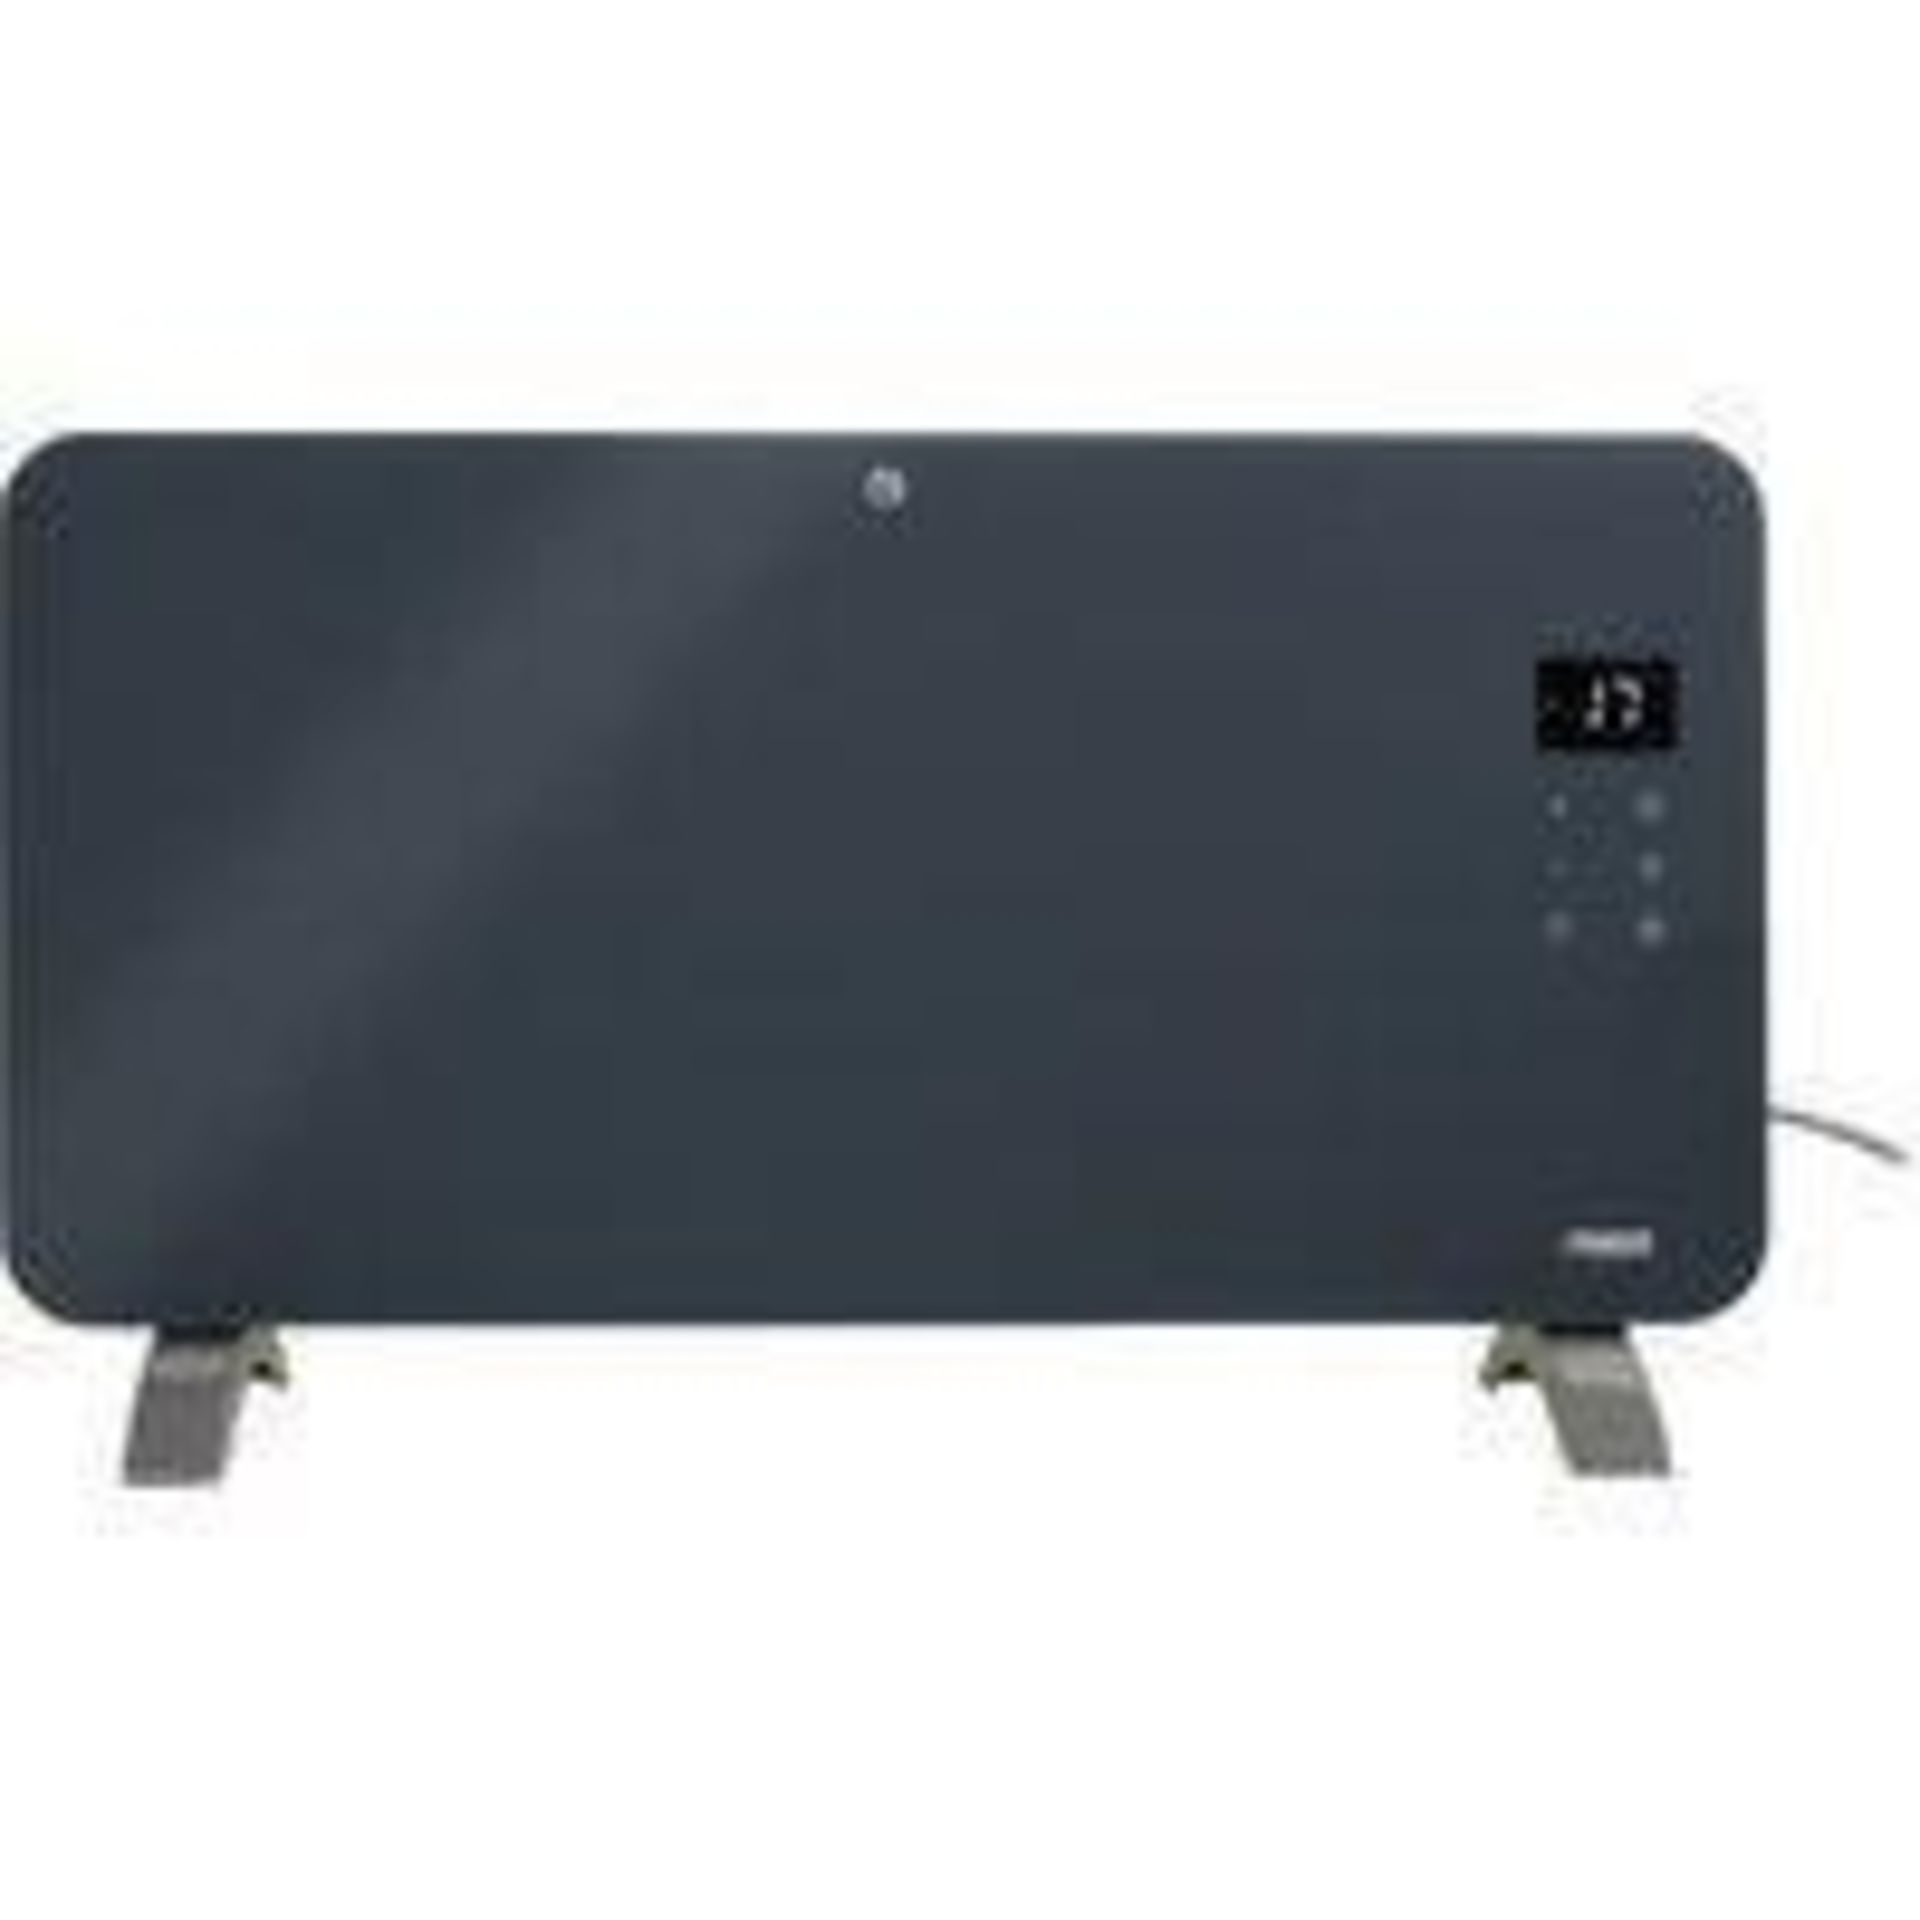 Princess Electric 1500W Grey Smart Panel HeaterProduct information Suitable for any room in the